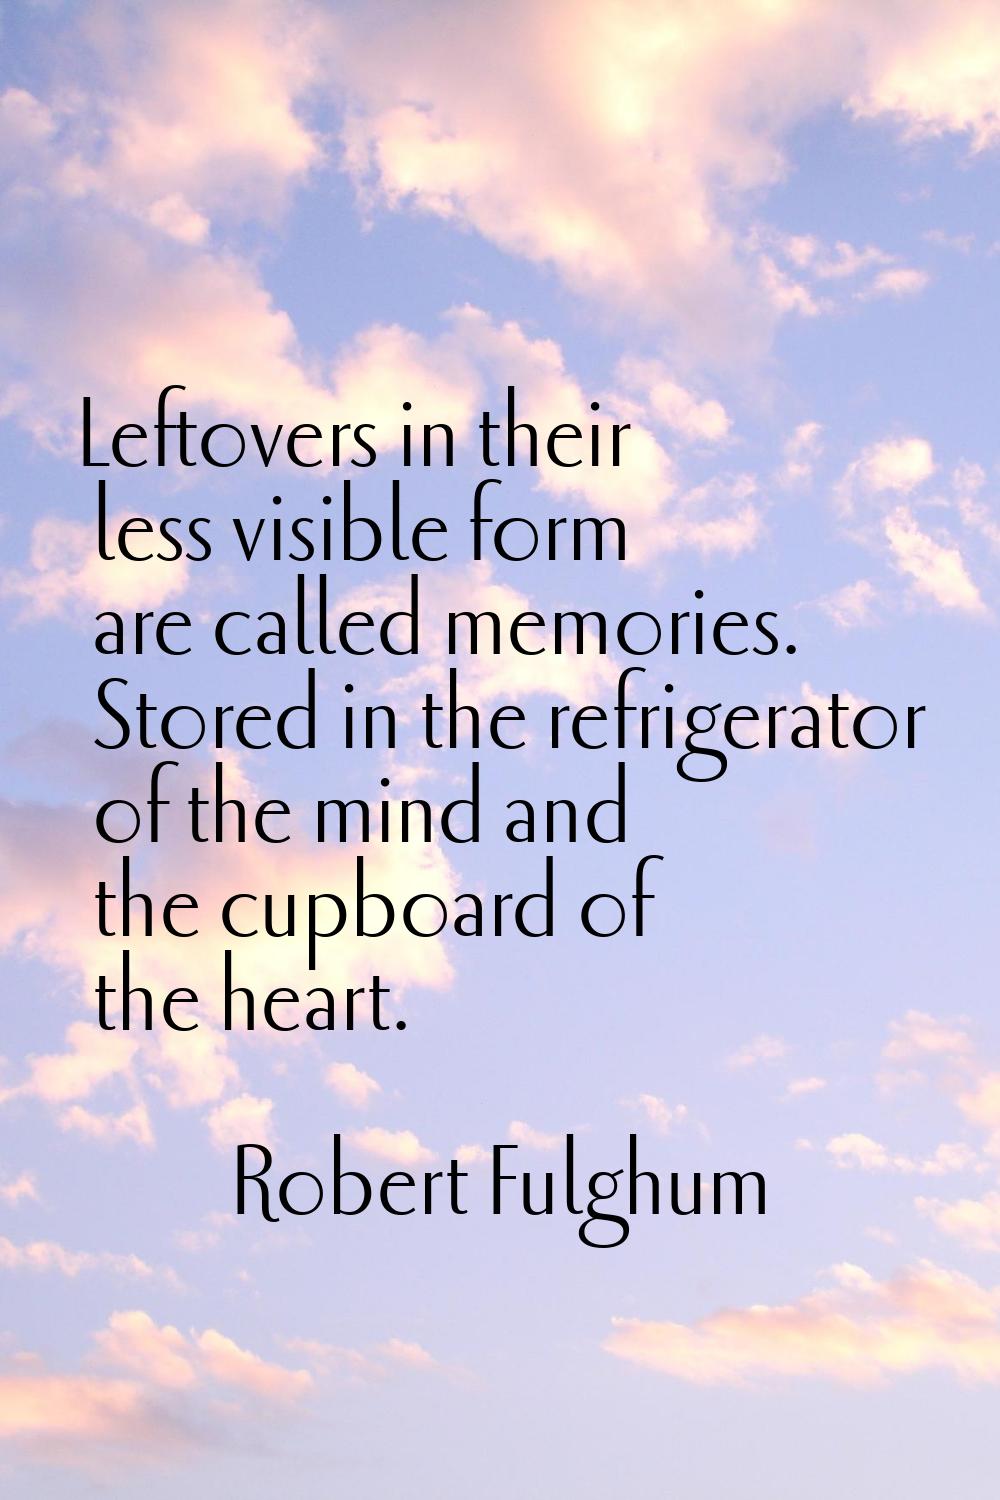 Leftovers in their less visible form are called memories. Stored in the refrigerator of the mind an